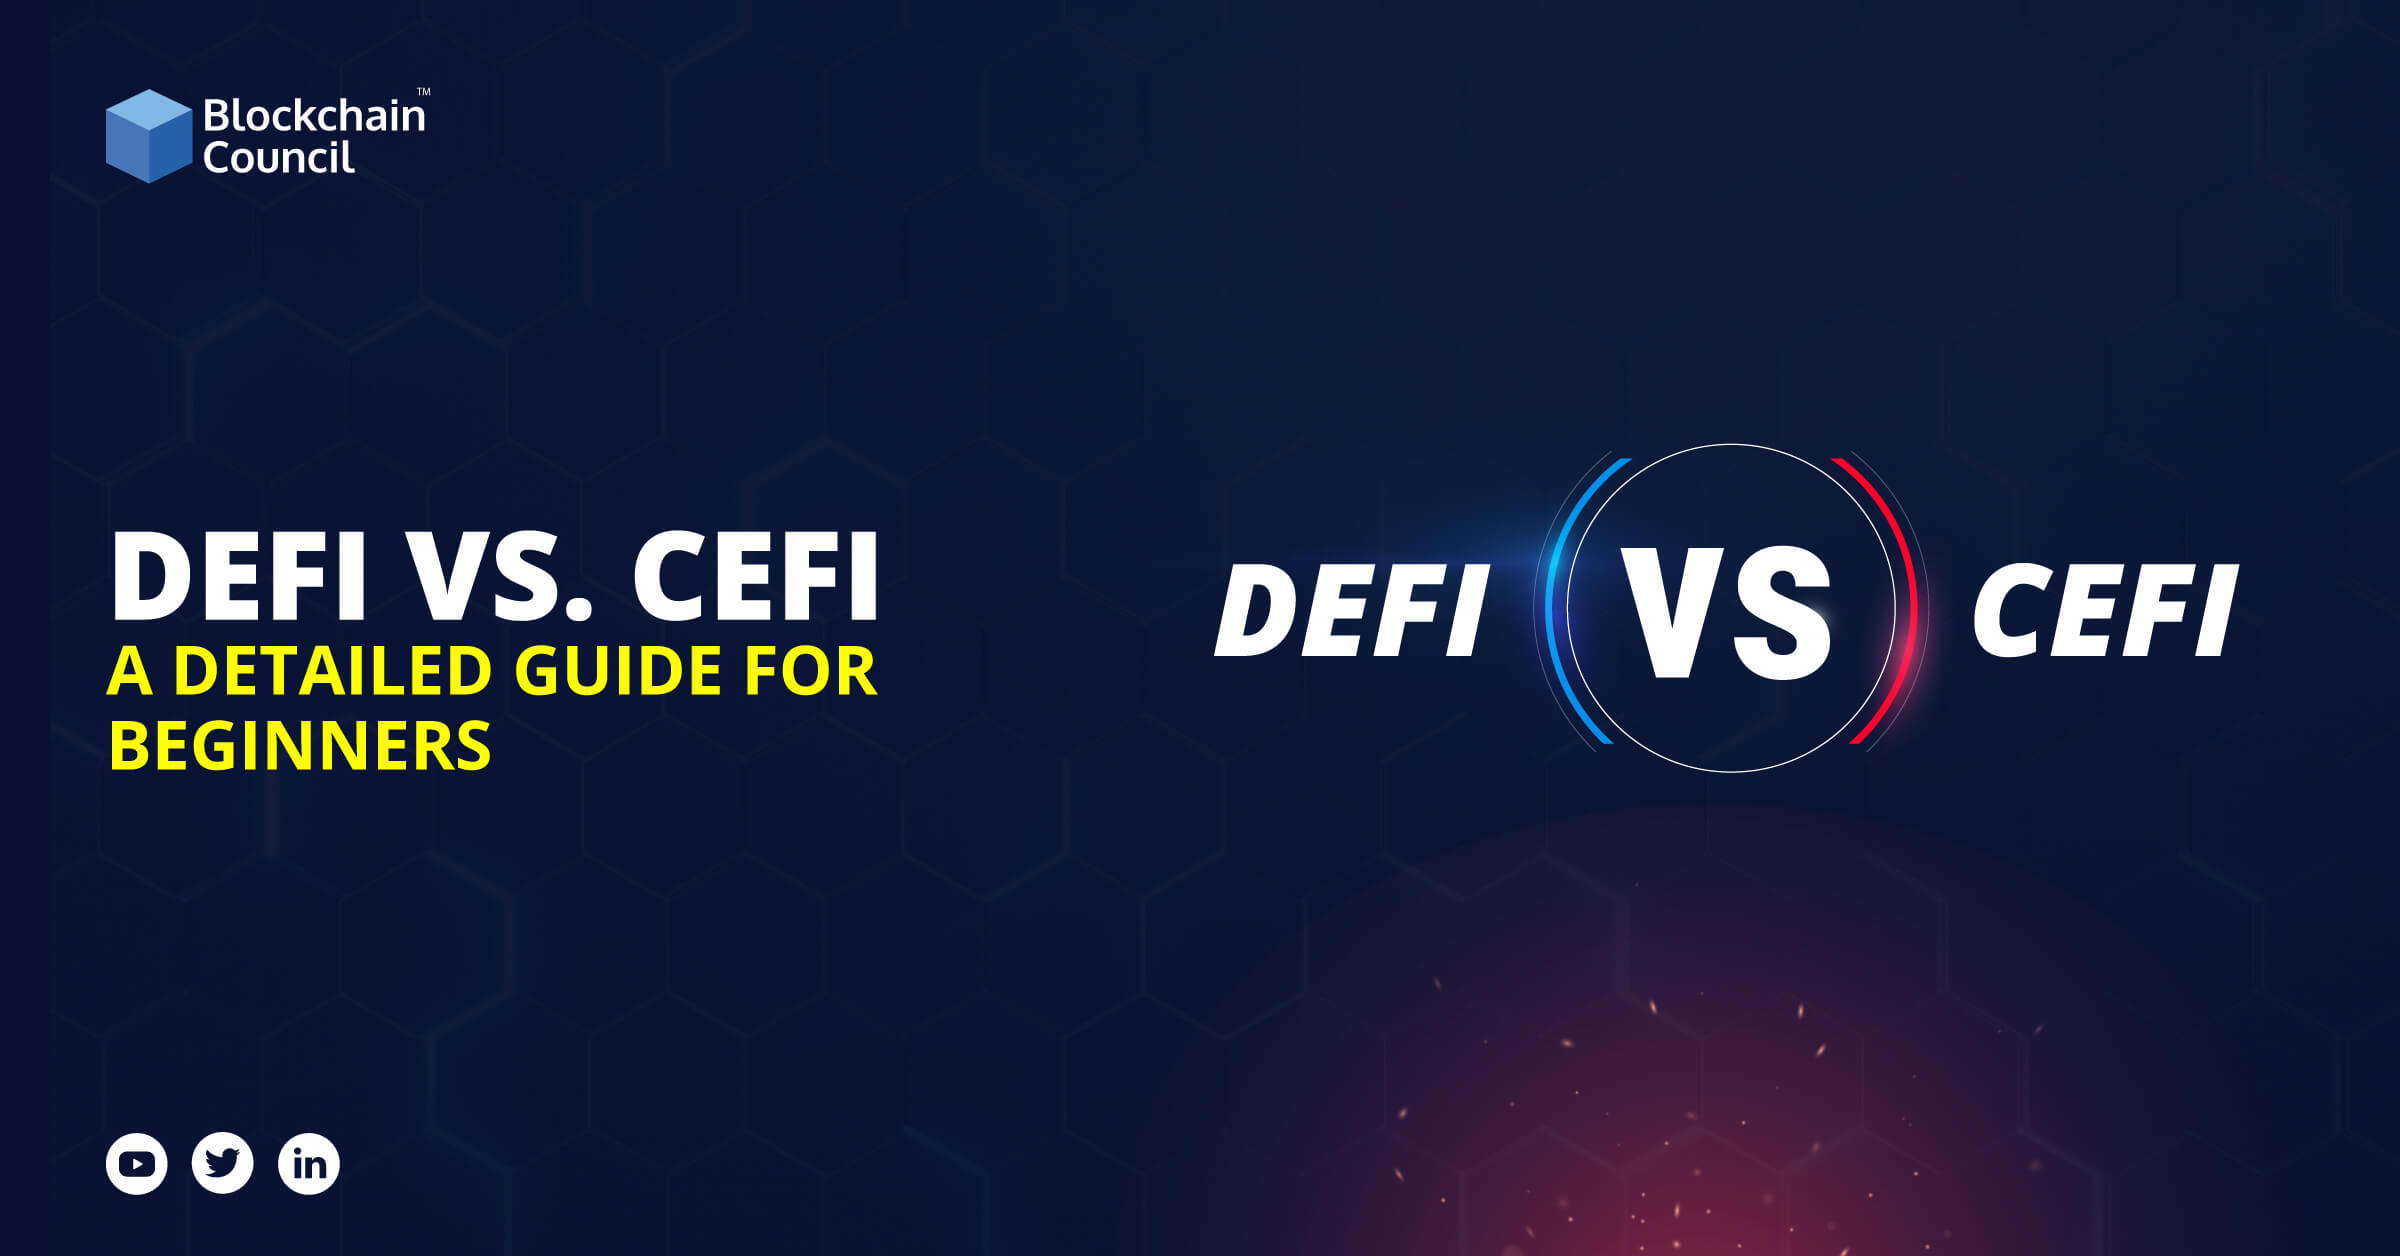 DeFi Vs. CeFi: A Detailed Guide for Beginners